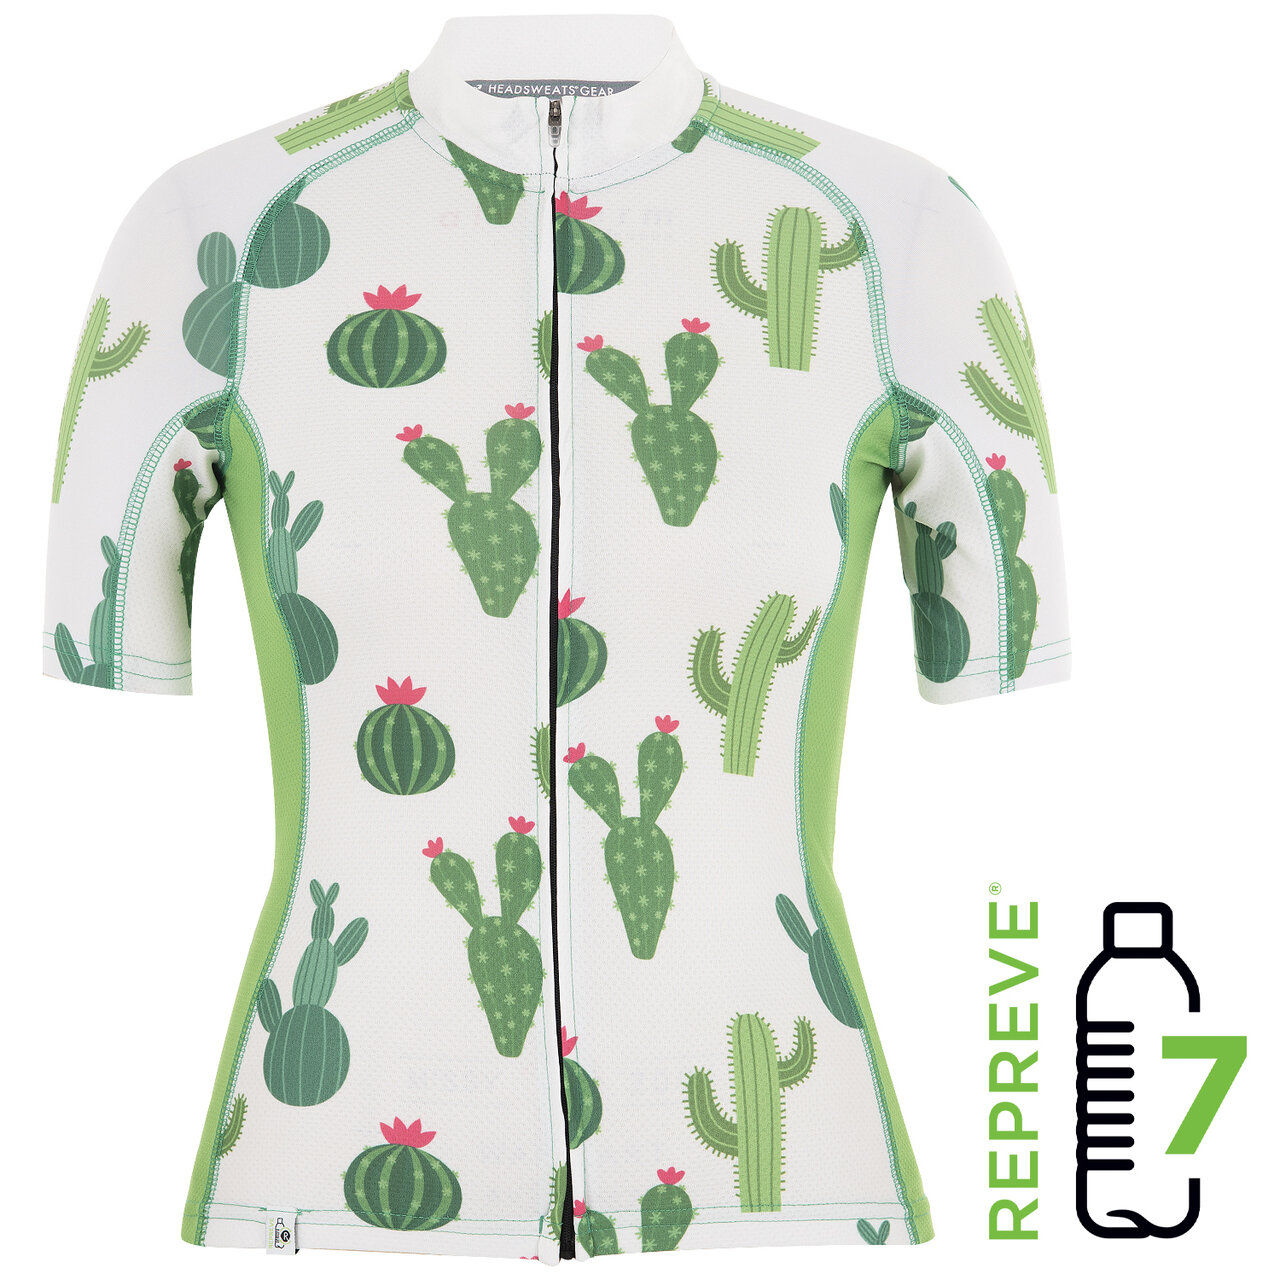 Womens_Cycling_Jersey_Cacti_Front__42834.1600357103.1280.1280.jpg